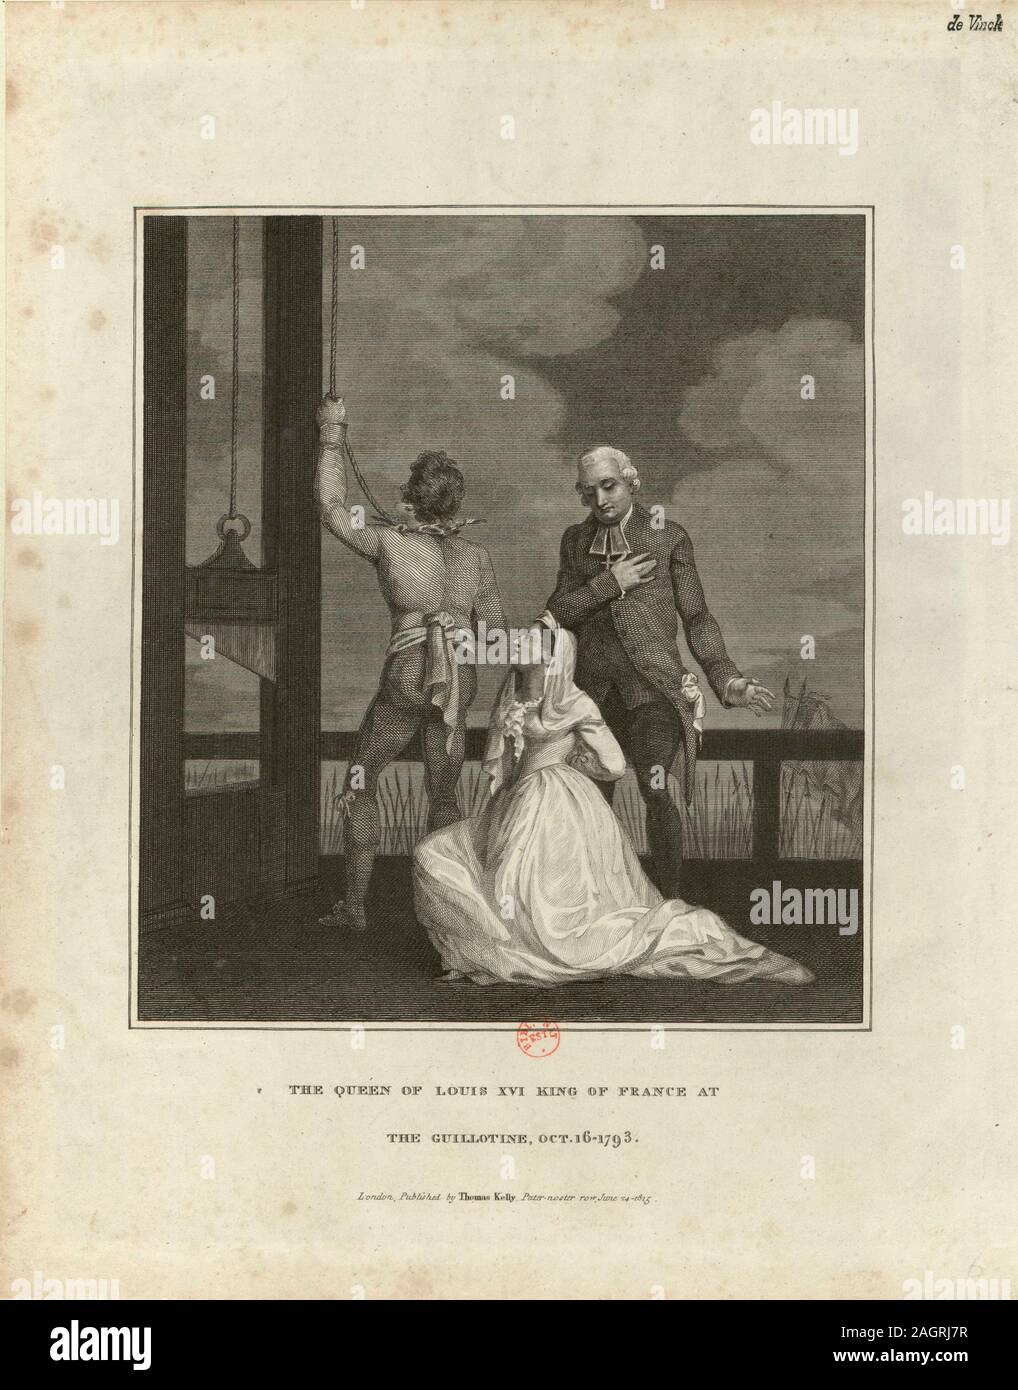 The Execution of Marie Antoinette on October 16, 1793. Museum: BIBLIOTHEQUE NATIONALE DE FRANCE. Author: ANONYMOUS. Stock Photo